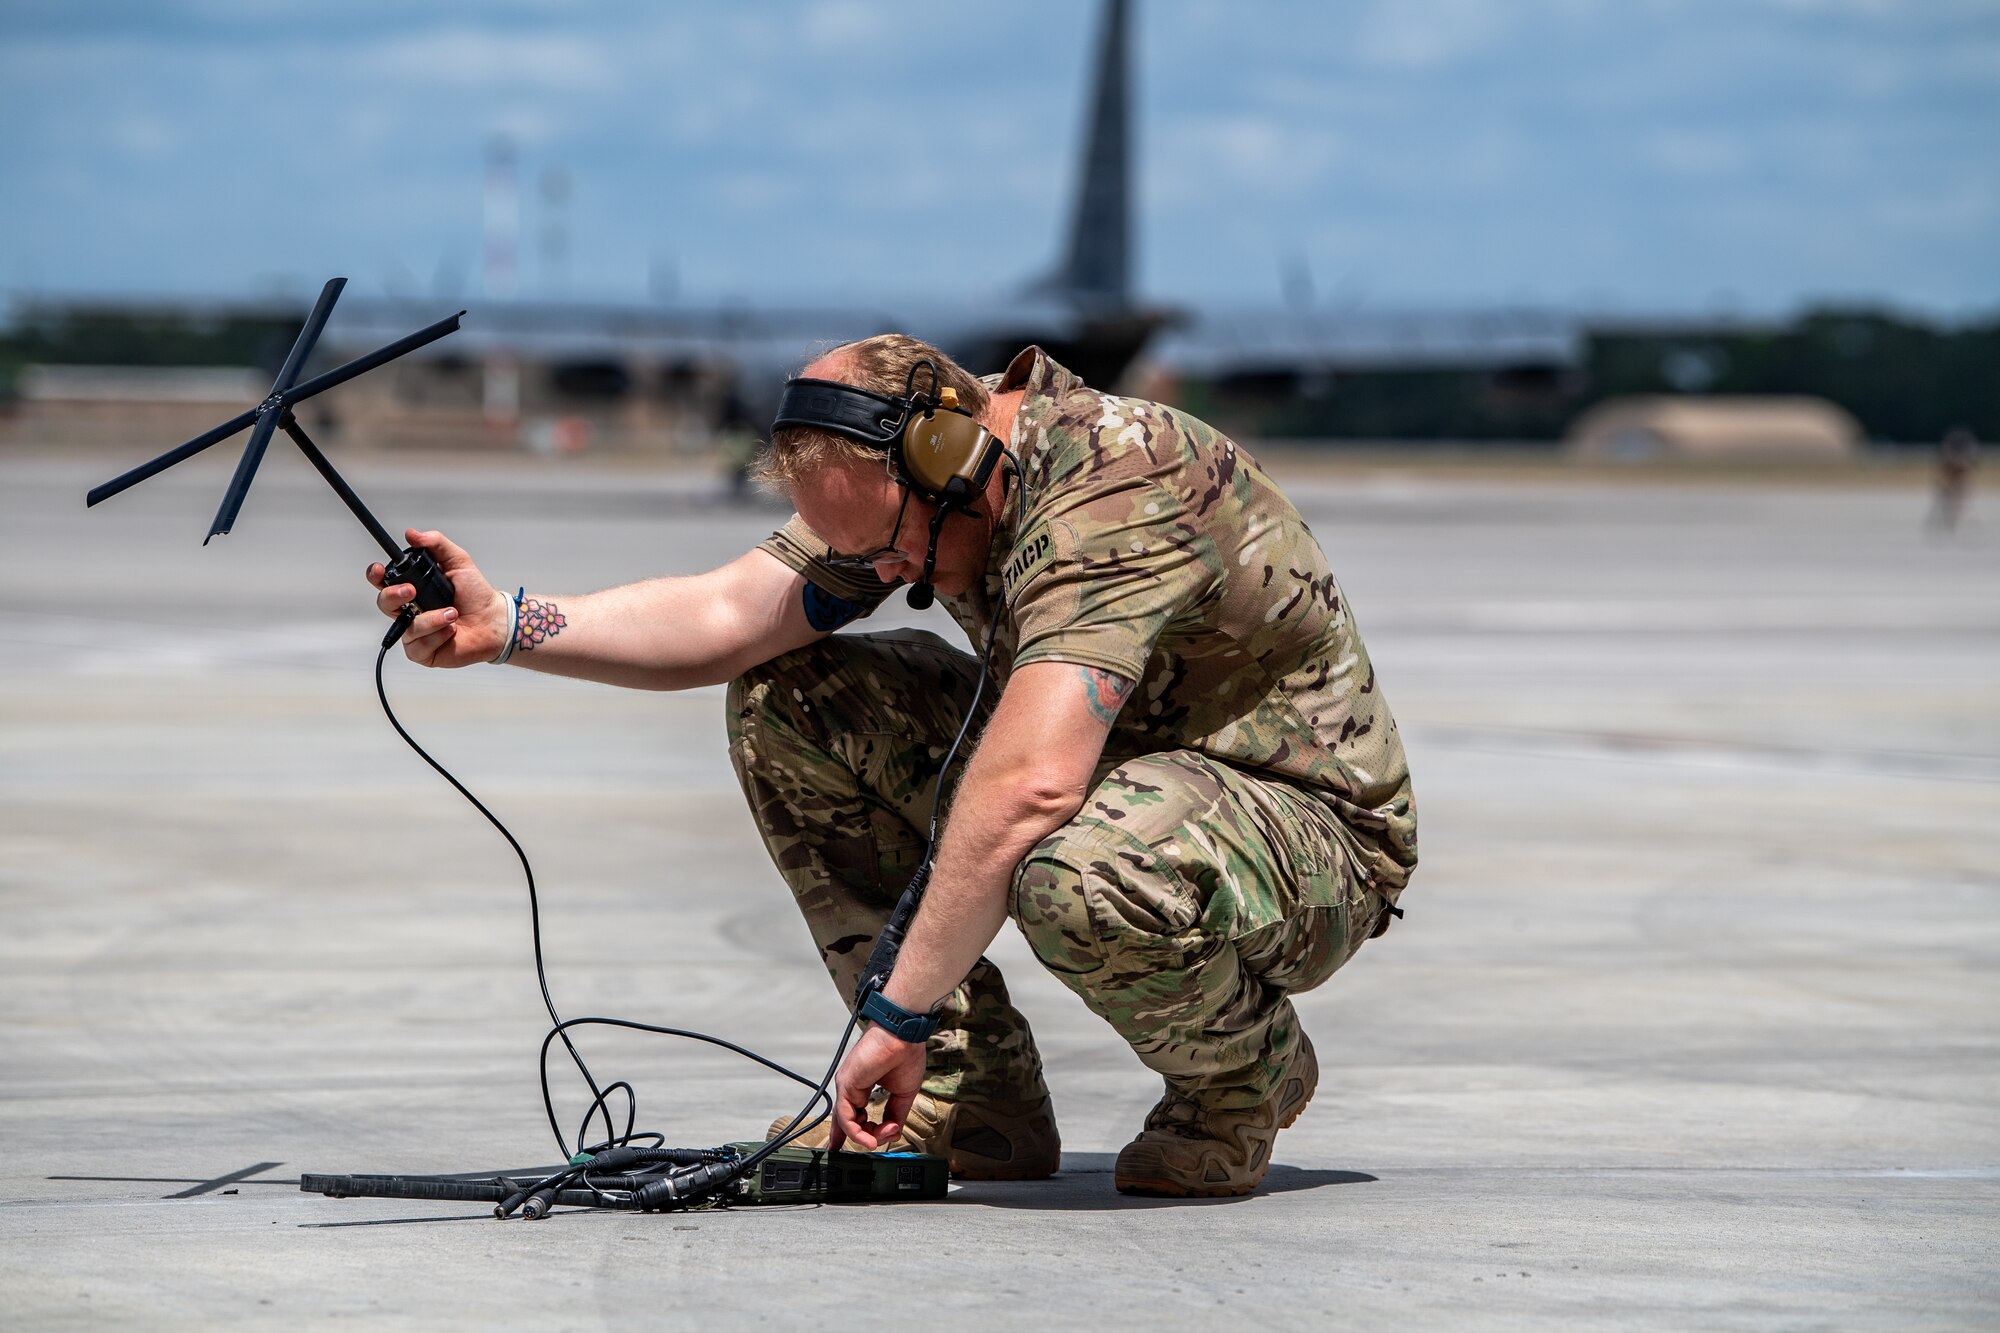 A U.S. Air Force Airman assigned to the 38th Rescue Squadron searches for a signal with a satellite communication radio antenna during Exercise Ready Tiger 24-1 at Savannah Air National Guard Base in Savannah, Georgia, April 10, 2024. During Ready Tiger 24-1, the 23rd Wing will be evaluated on the integration of Air Force Force Generation principles such as Agile Combat Employment, integrated combat turns, forward aerial refueling points, multi-capable Airmen, and combat search and rescue capabilities. (U.S. Air Force photo by Senior Airman Courtney Sebastianelli)